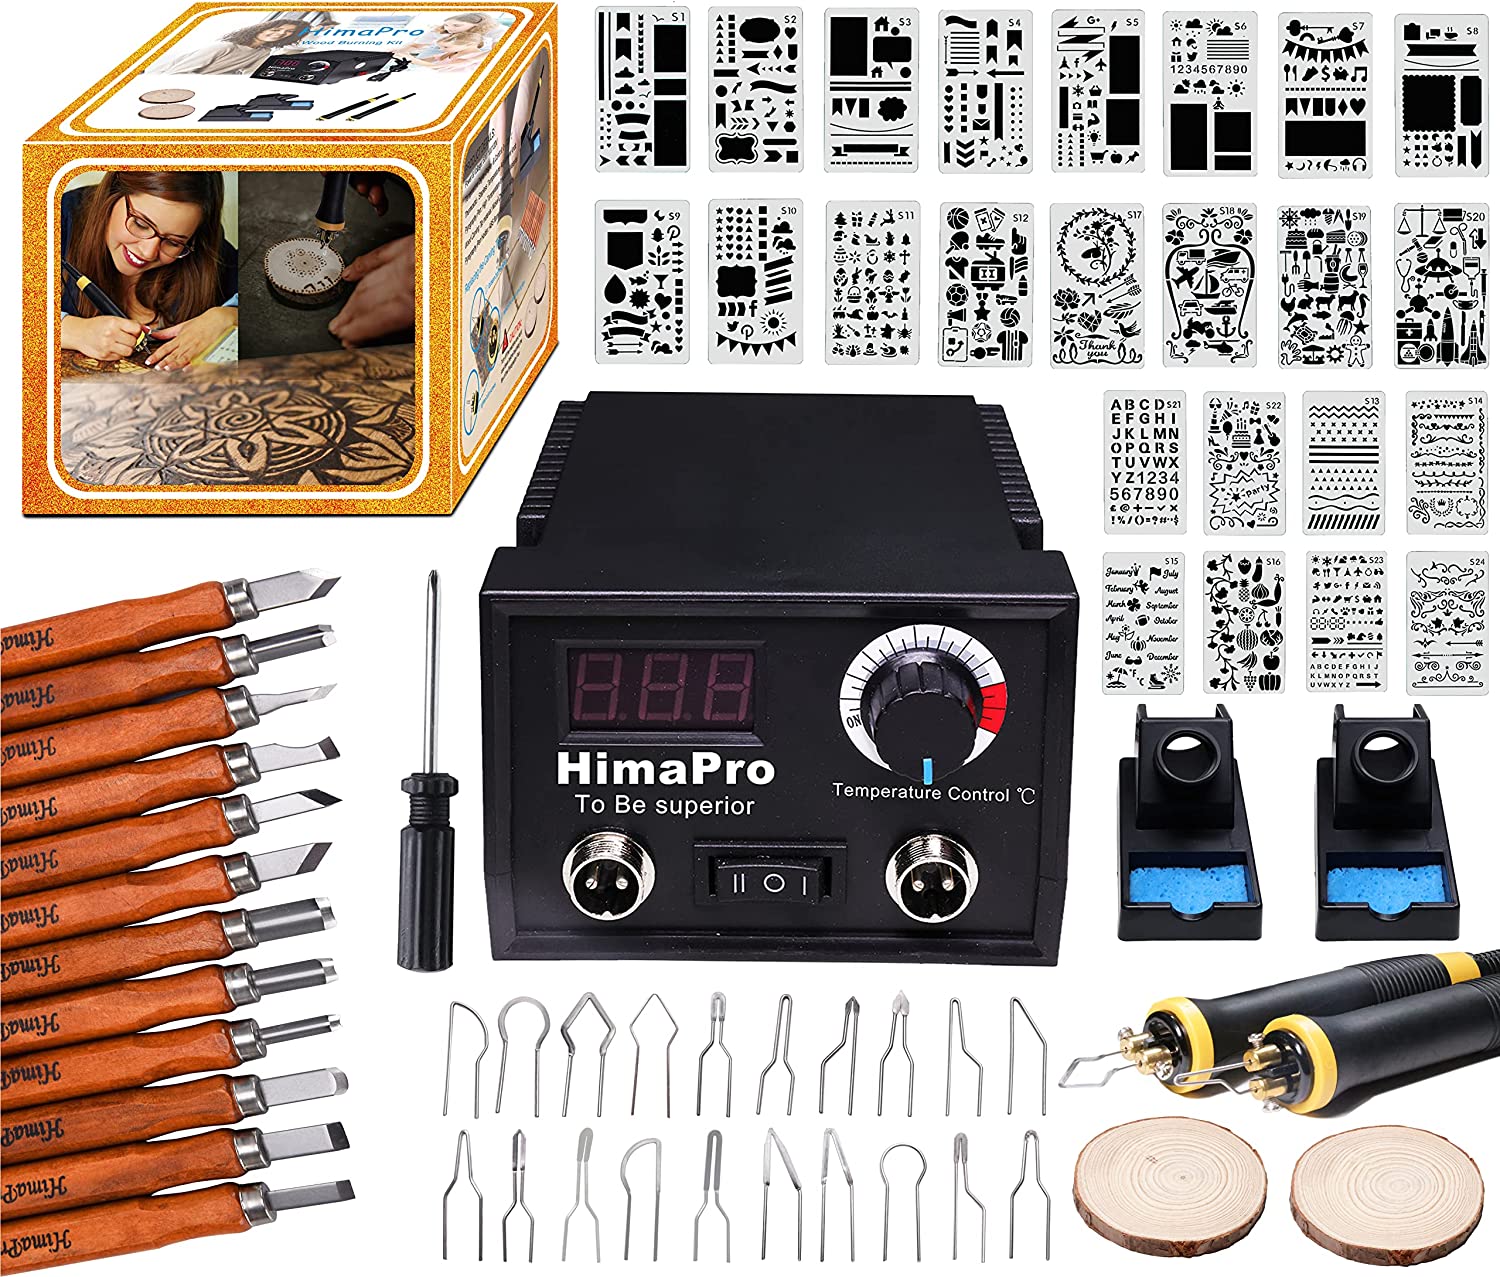 Pyrography Machine Soldering Iron Set, 60W LCD Wood Burner Kit, Temperature  Adjustable, with 21 Pyrograph Wire Tips for Burning